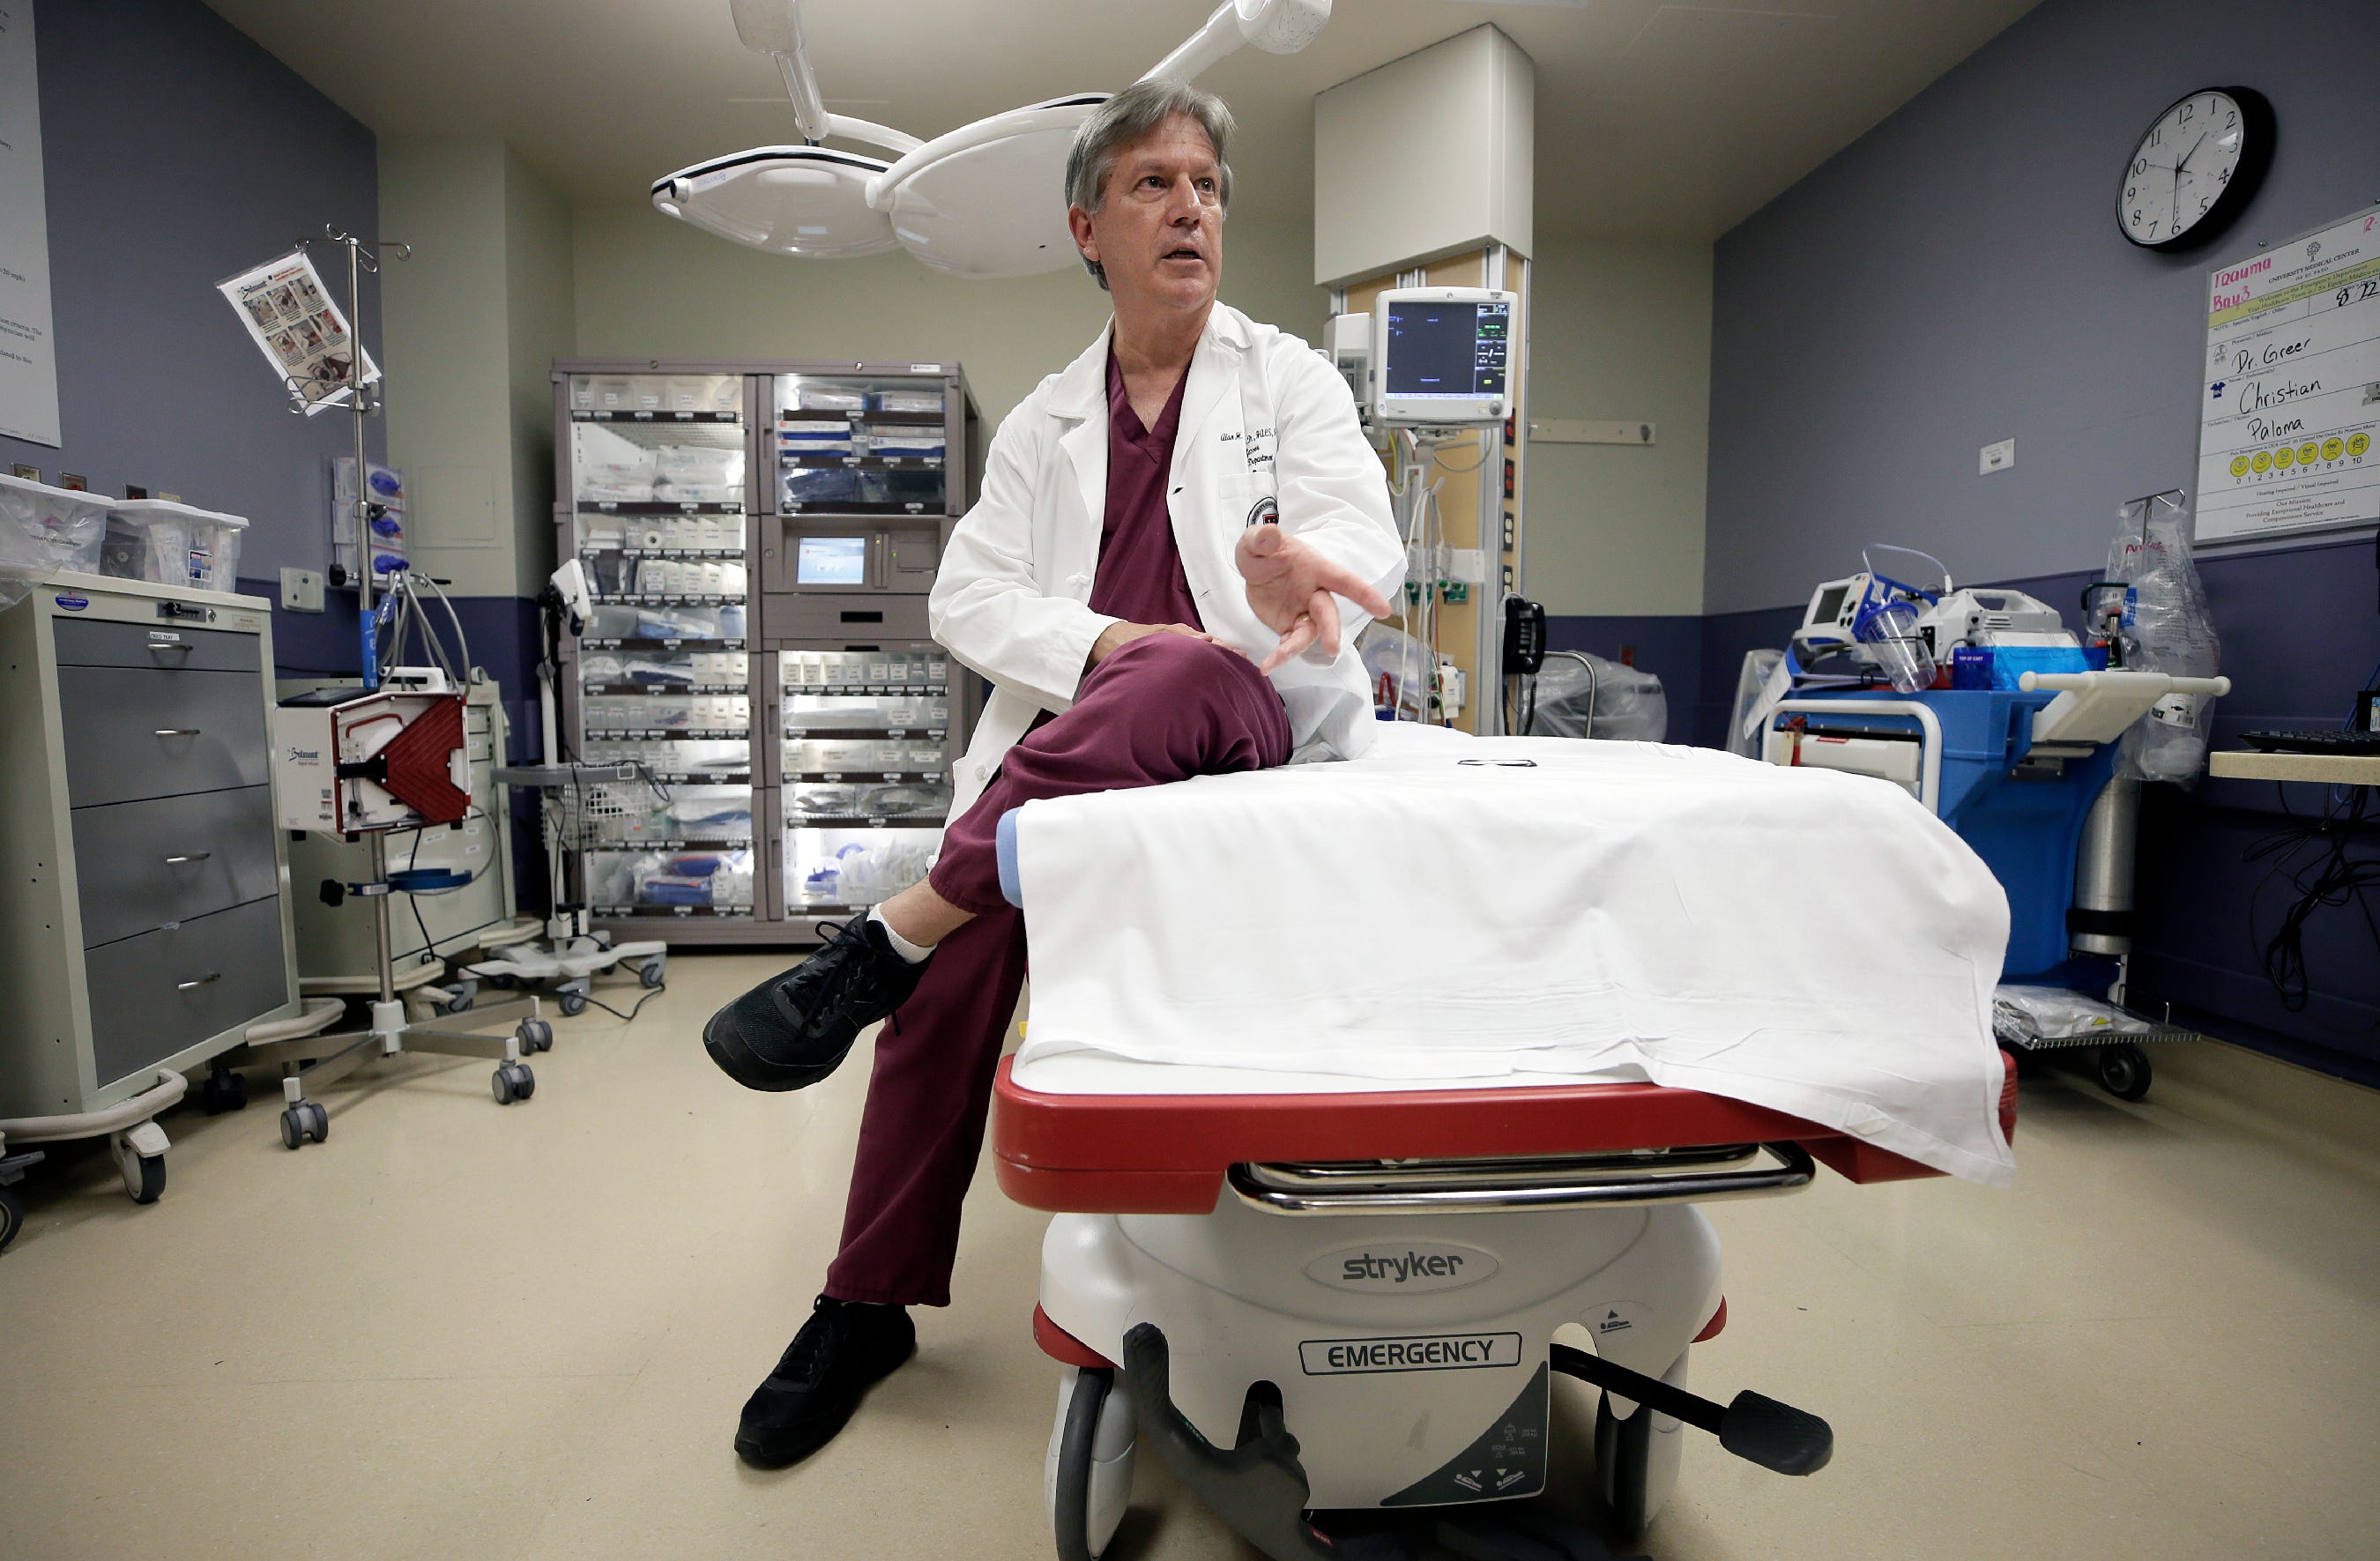 Dr. Alan Tyroch, UMC's trauma medical director and founding chair of surgery at Texas Tech University Health Sciences Center El Paso's Paul L. Foster School of Medicine, talks about his team's response to the Aug. 3, 2019, mass shooting at an East Side Walmart.